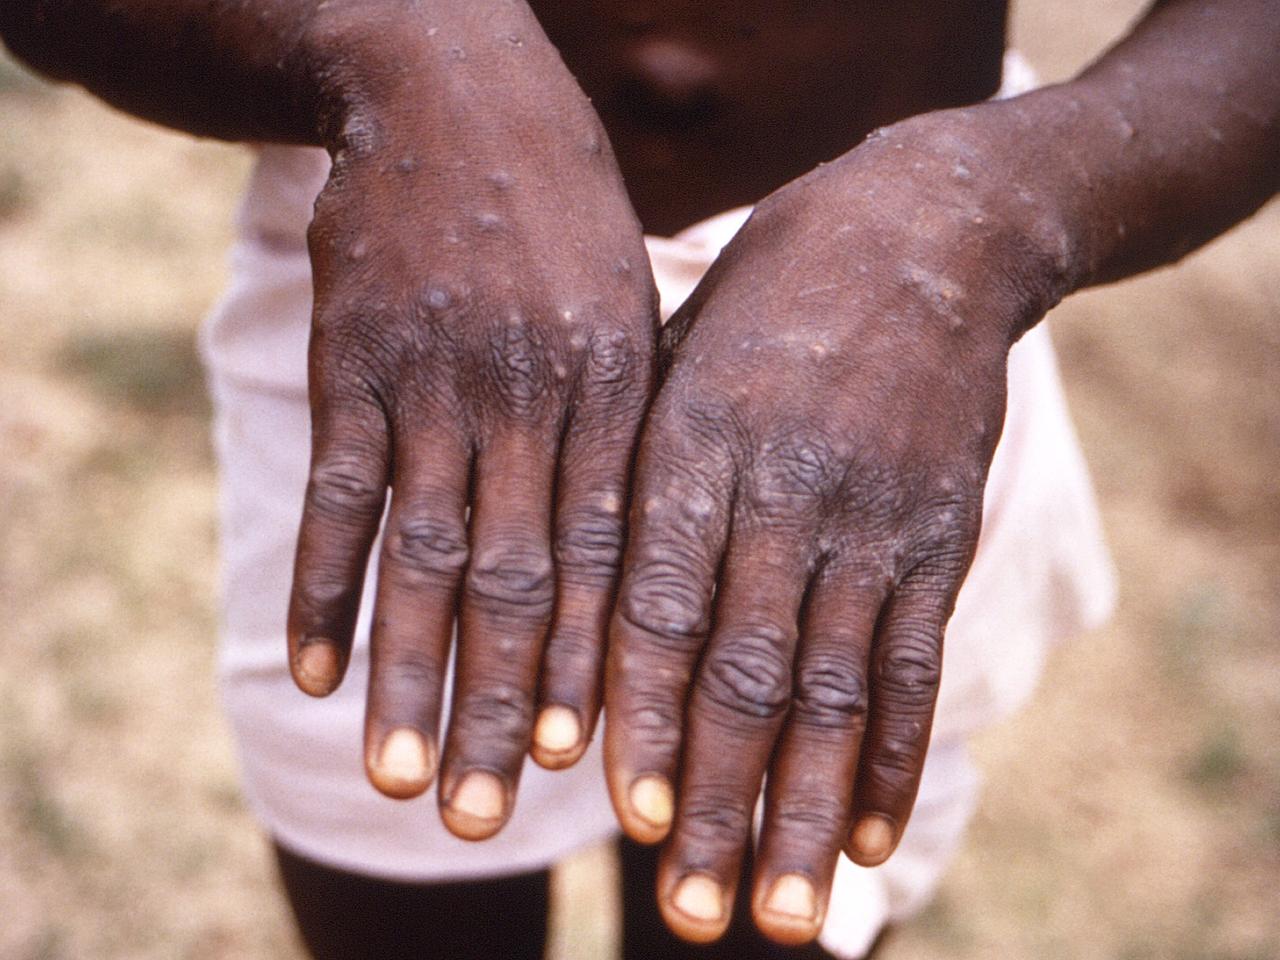 A person with monkeypox in the Democratic Republic of the Congo holds out their hands, which are covered in lesions.